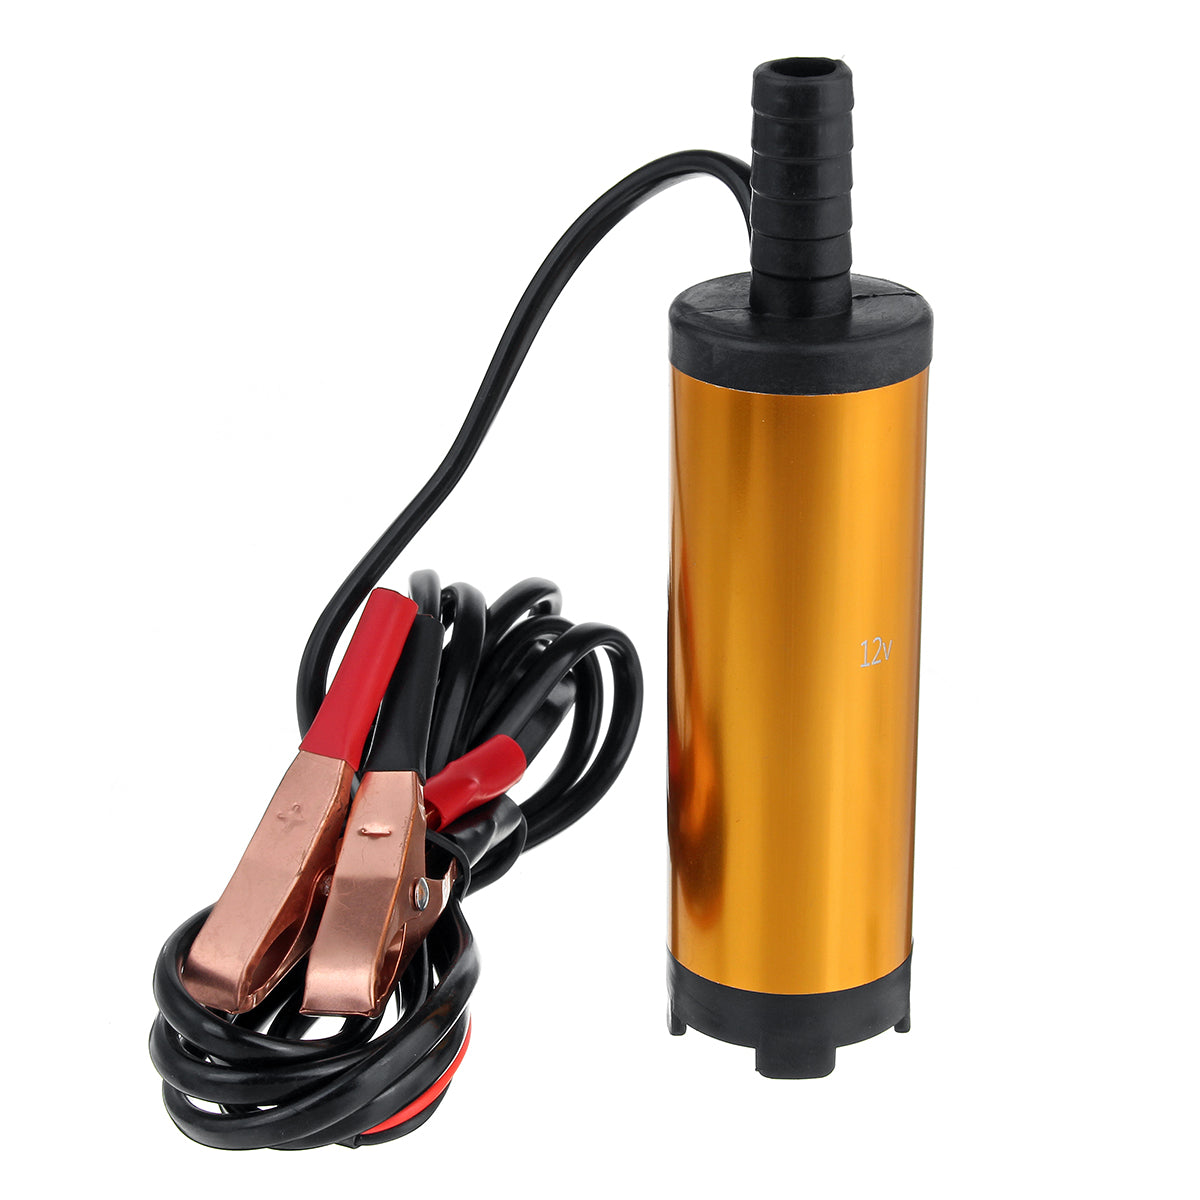 Goldenrod 12V/24V 38mm/51mm 8700r / min Stainless Steel Silver Electric Submersible Pump Water